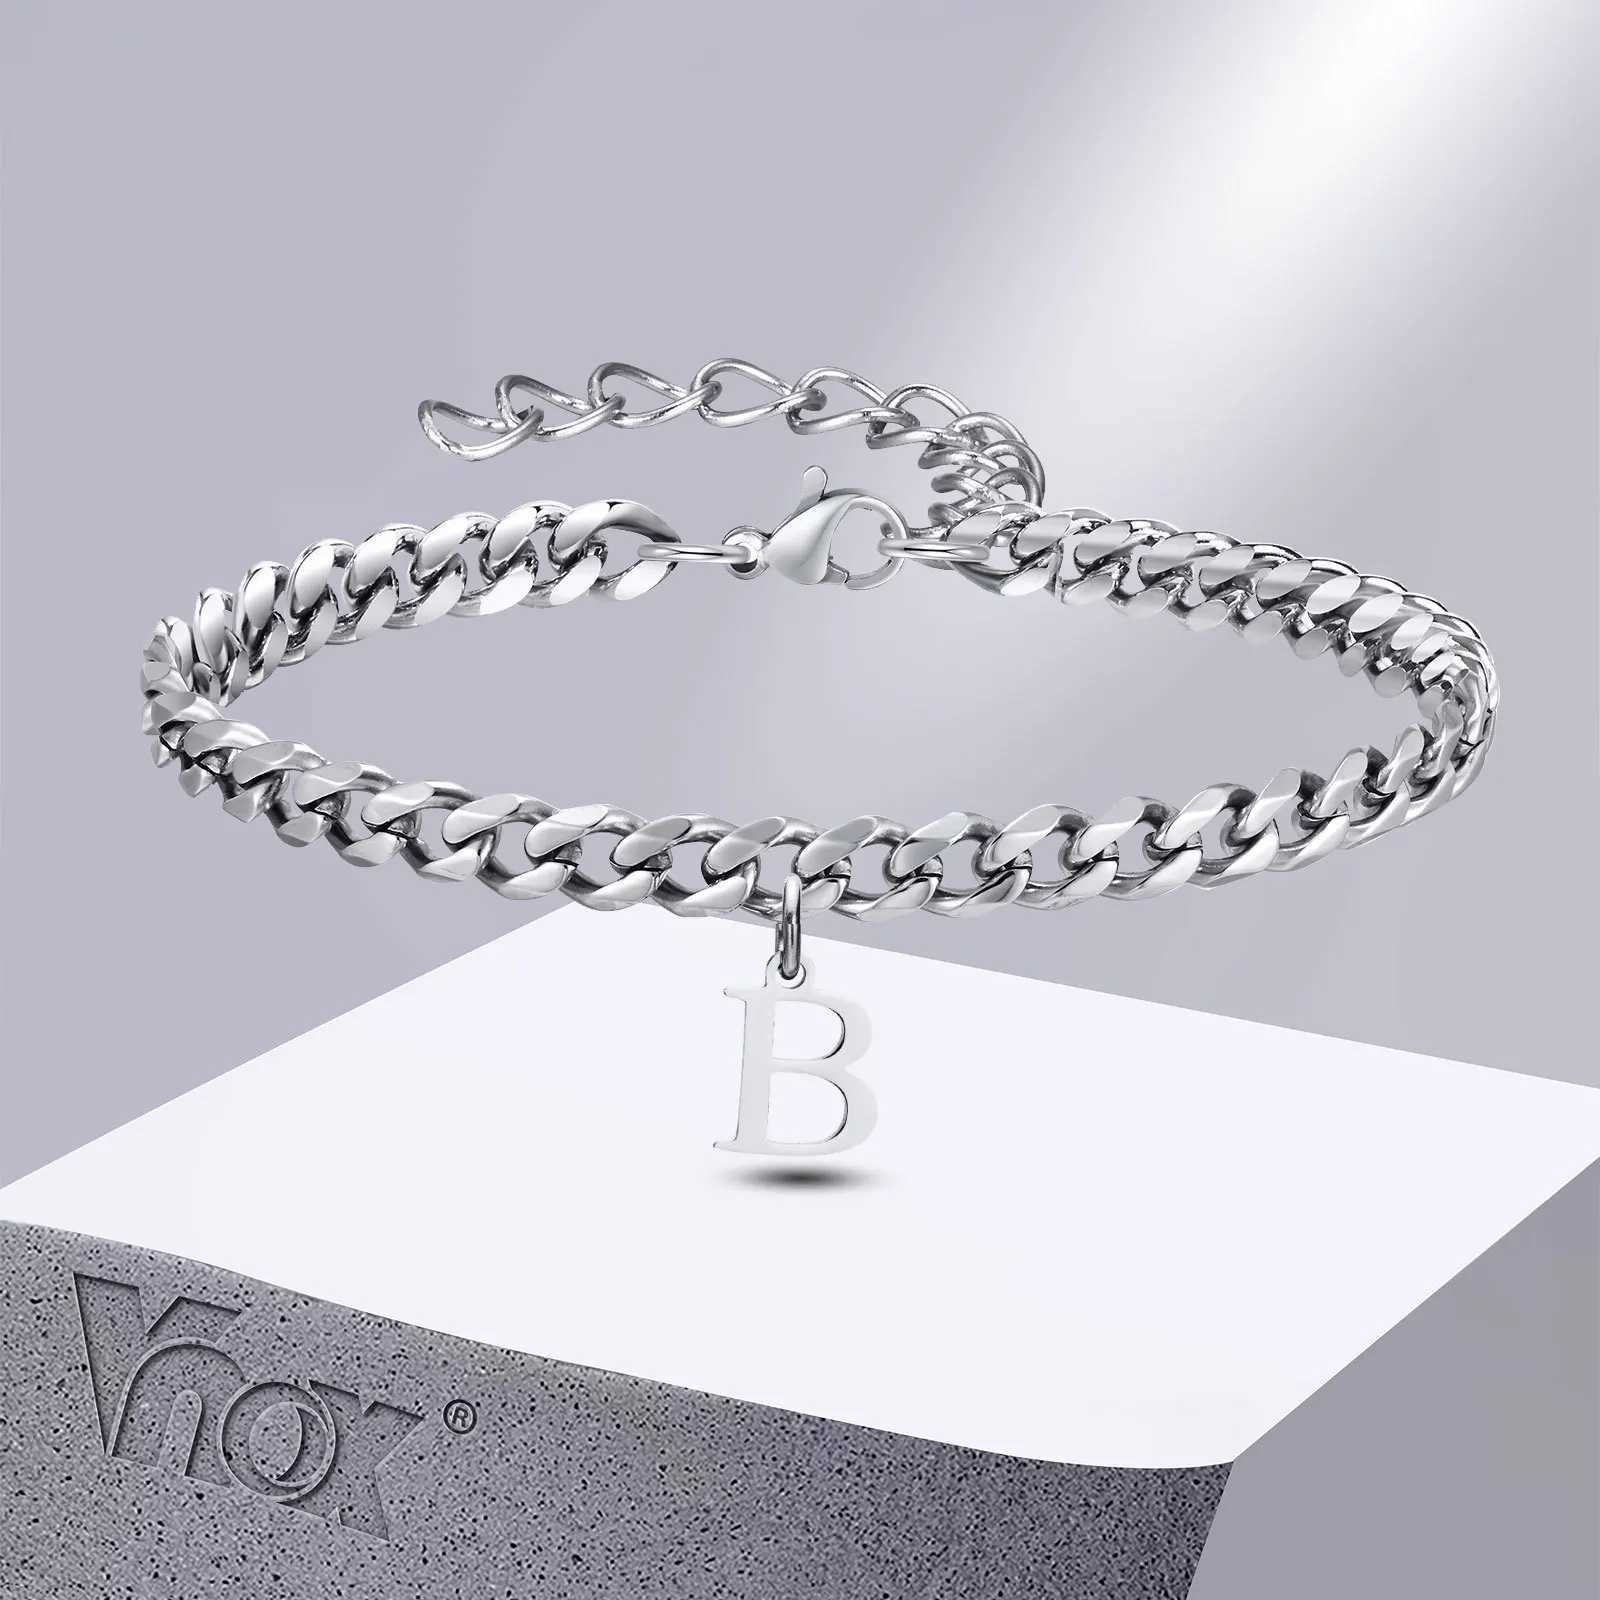 Chain Vnox A-Z Mens Initial Bracelet Never Fading Silver Stainless Steel Cuban Chain Bracelet with 26 Letters Q240401